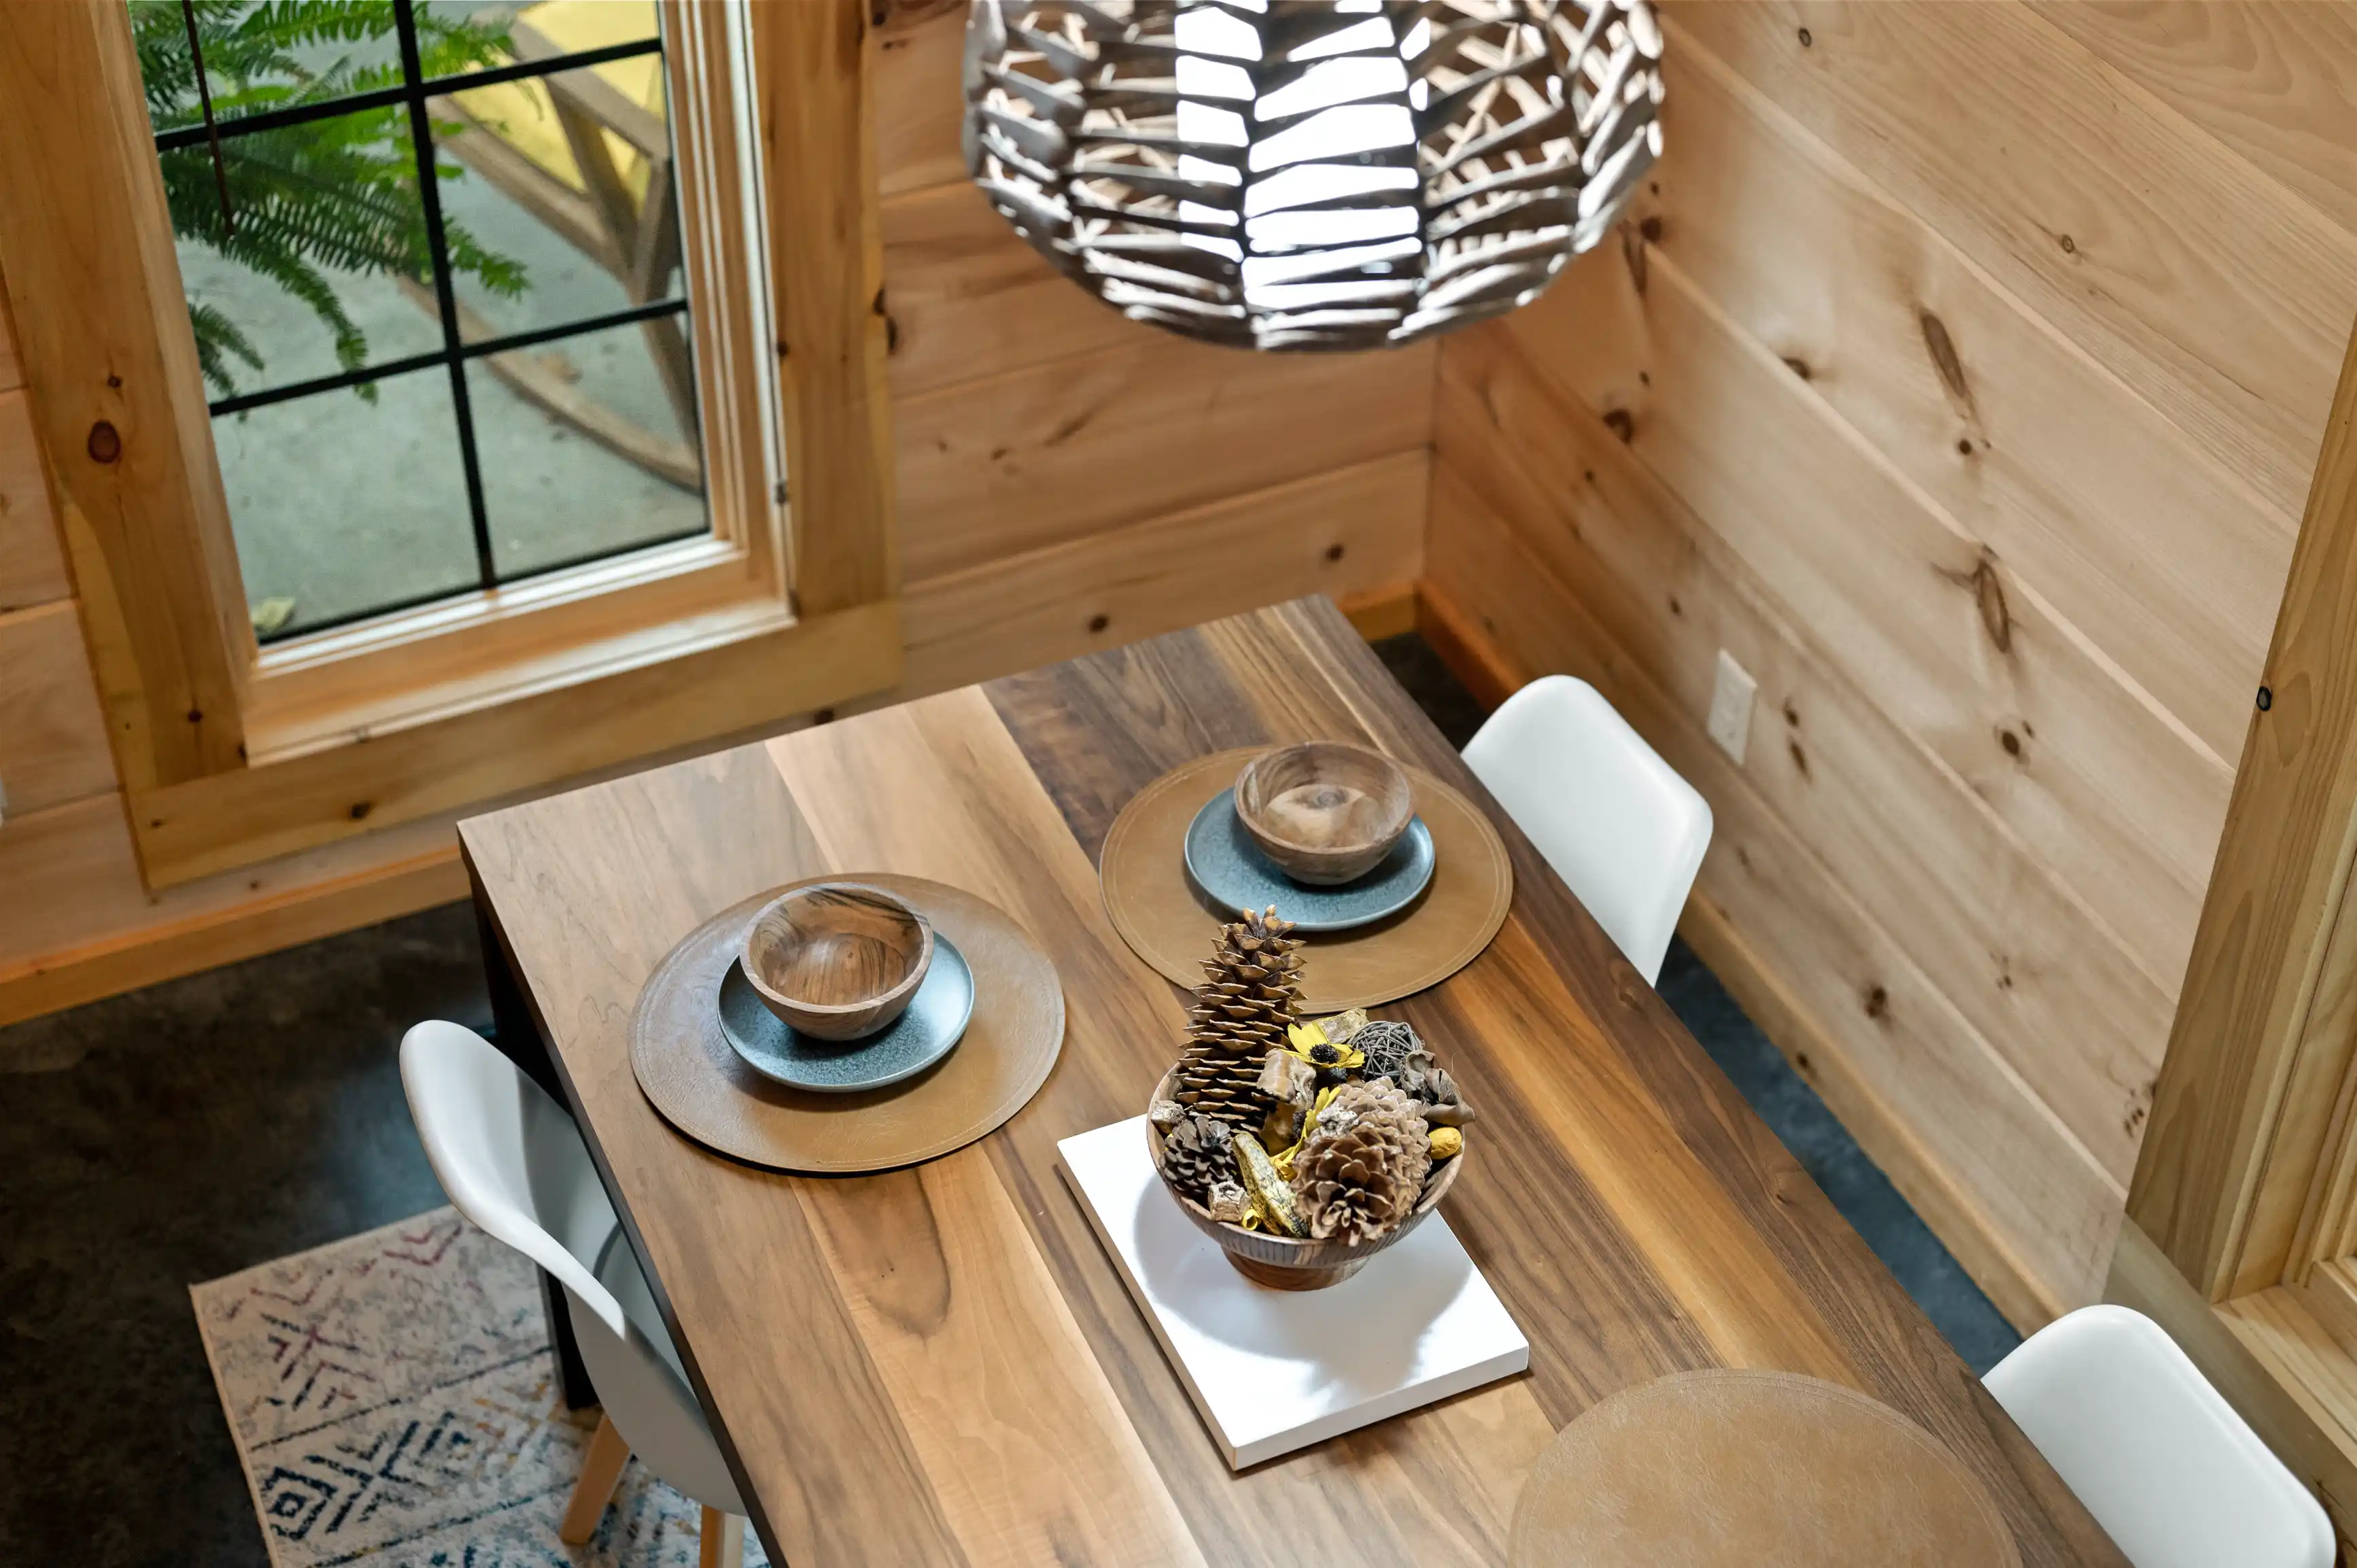 Cozy wooden interior of a dining area with modern furnishings, a decorative centerpiece on the table, and a unique pendant light above, near a window overlooking greenery.